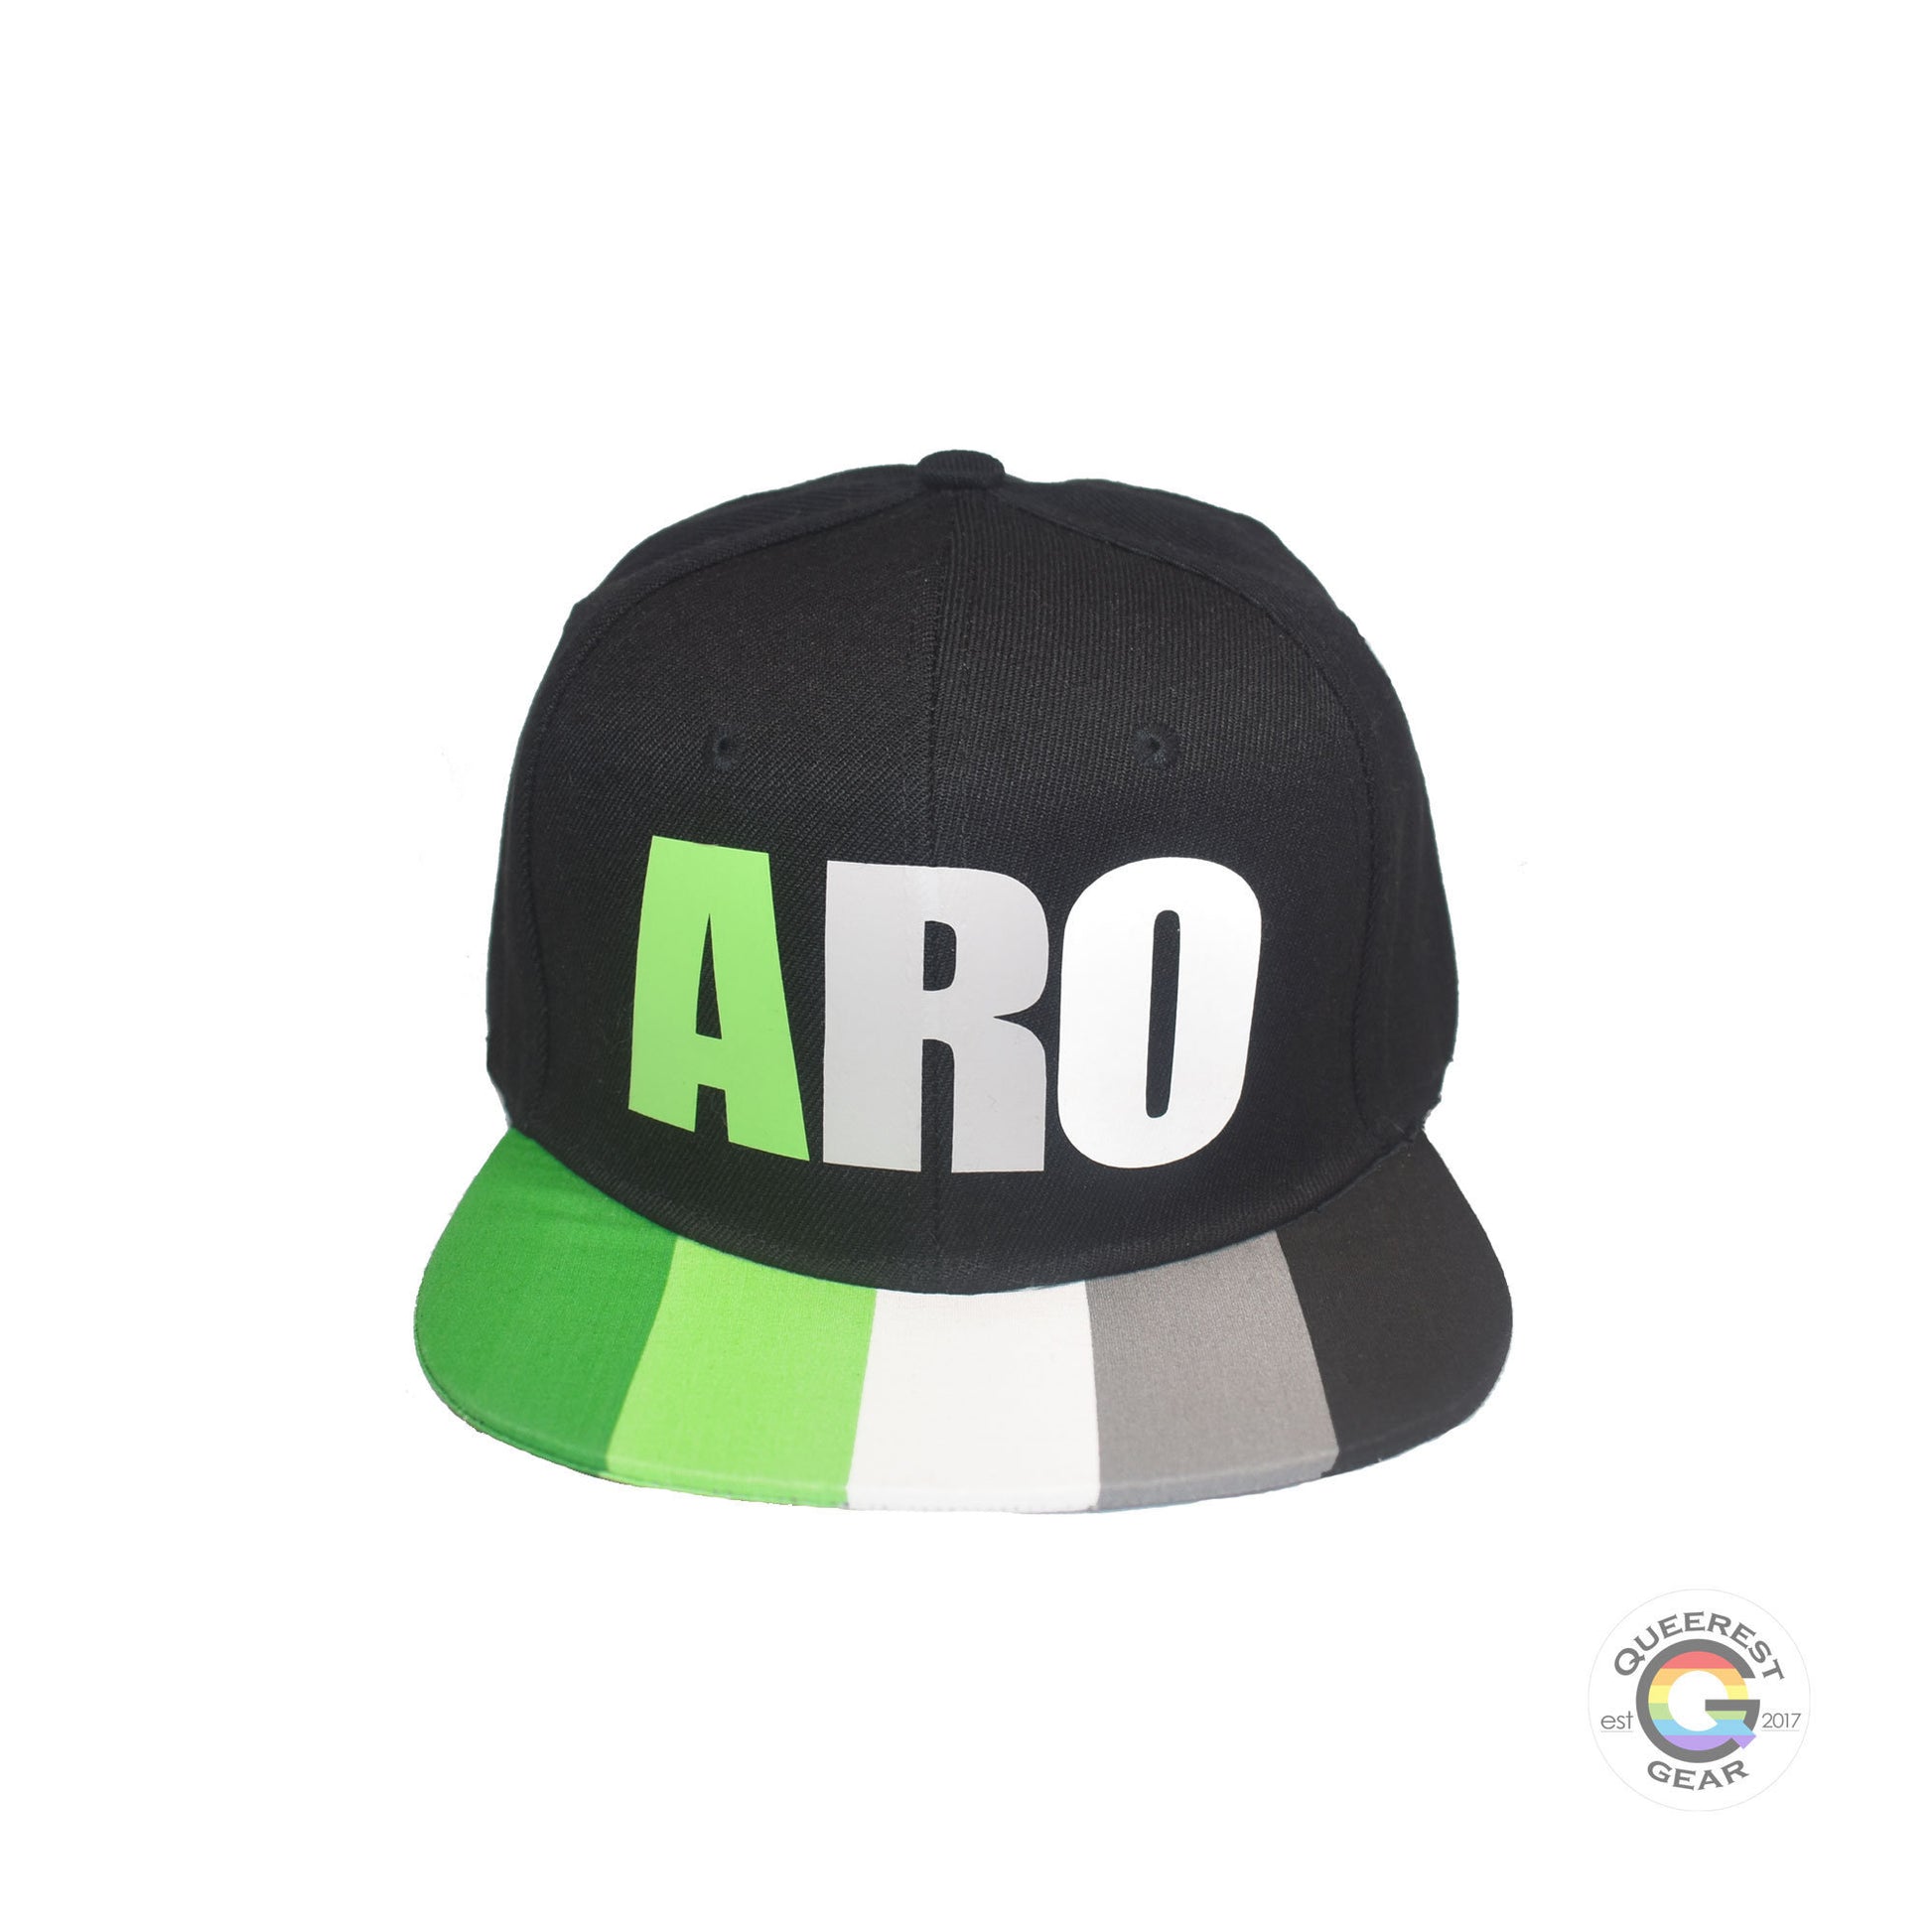 Black flat bill snapback hat. The brim has the aromantic pride flag on both sides and the front of the hat has the word “ARO” in green, grey, and white. Front view